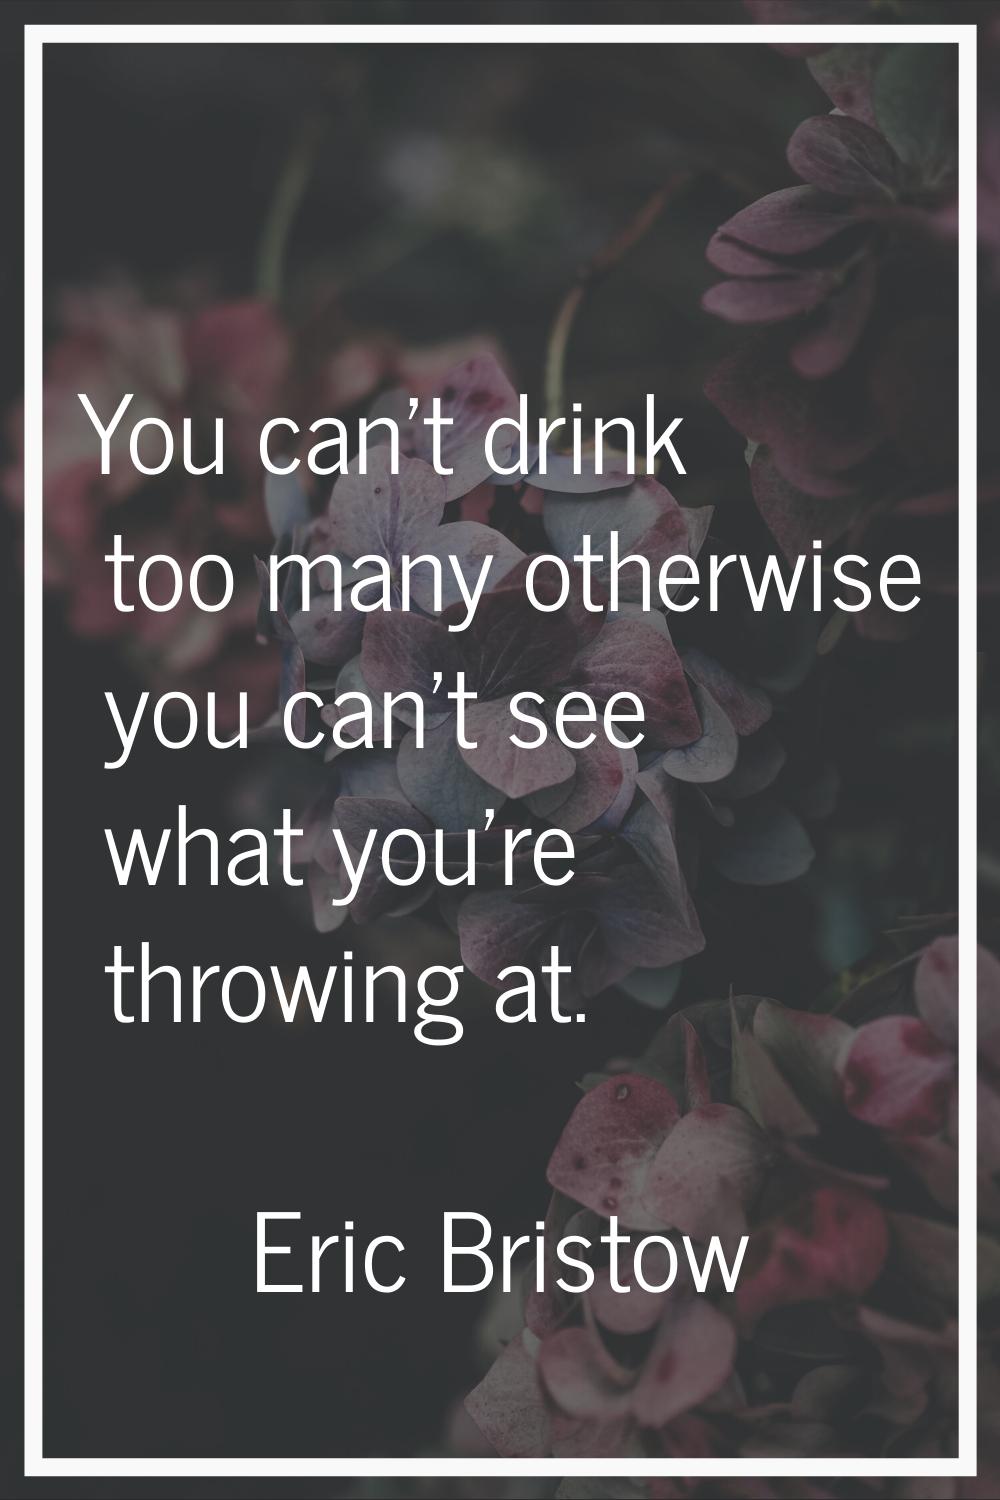 You can't drink too many otherwise you can't see what you're throwing at.